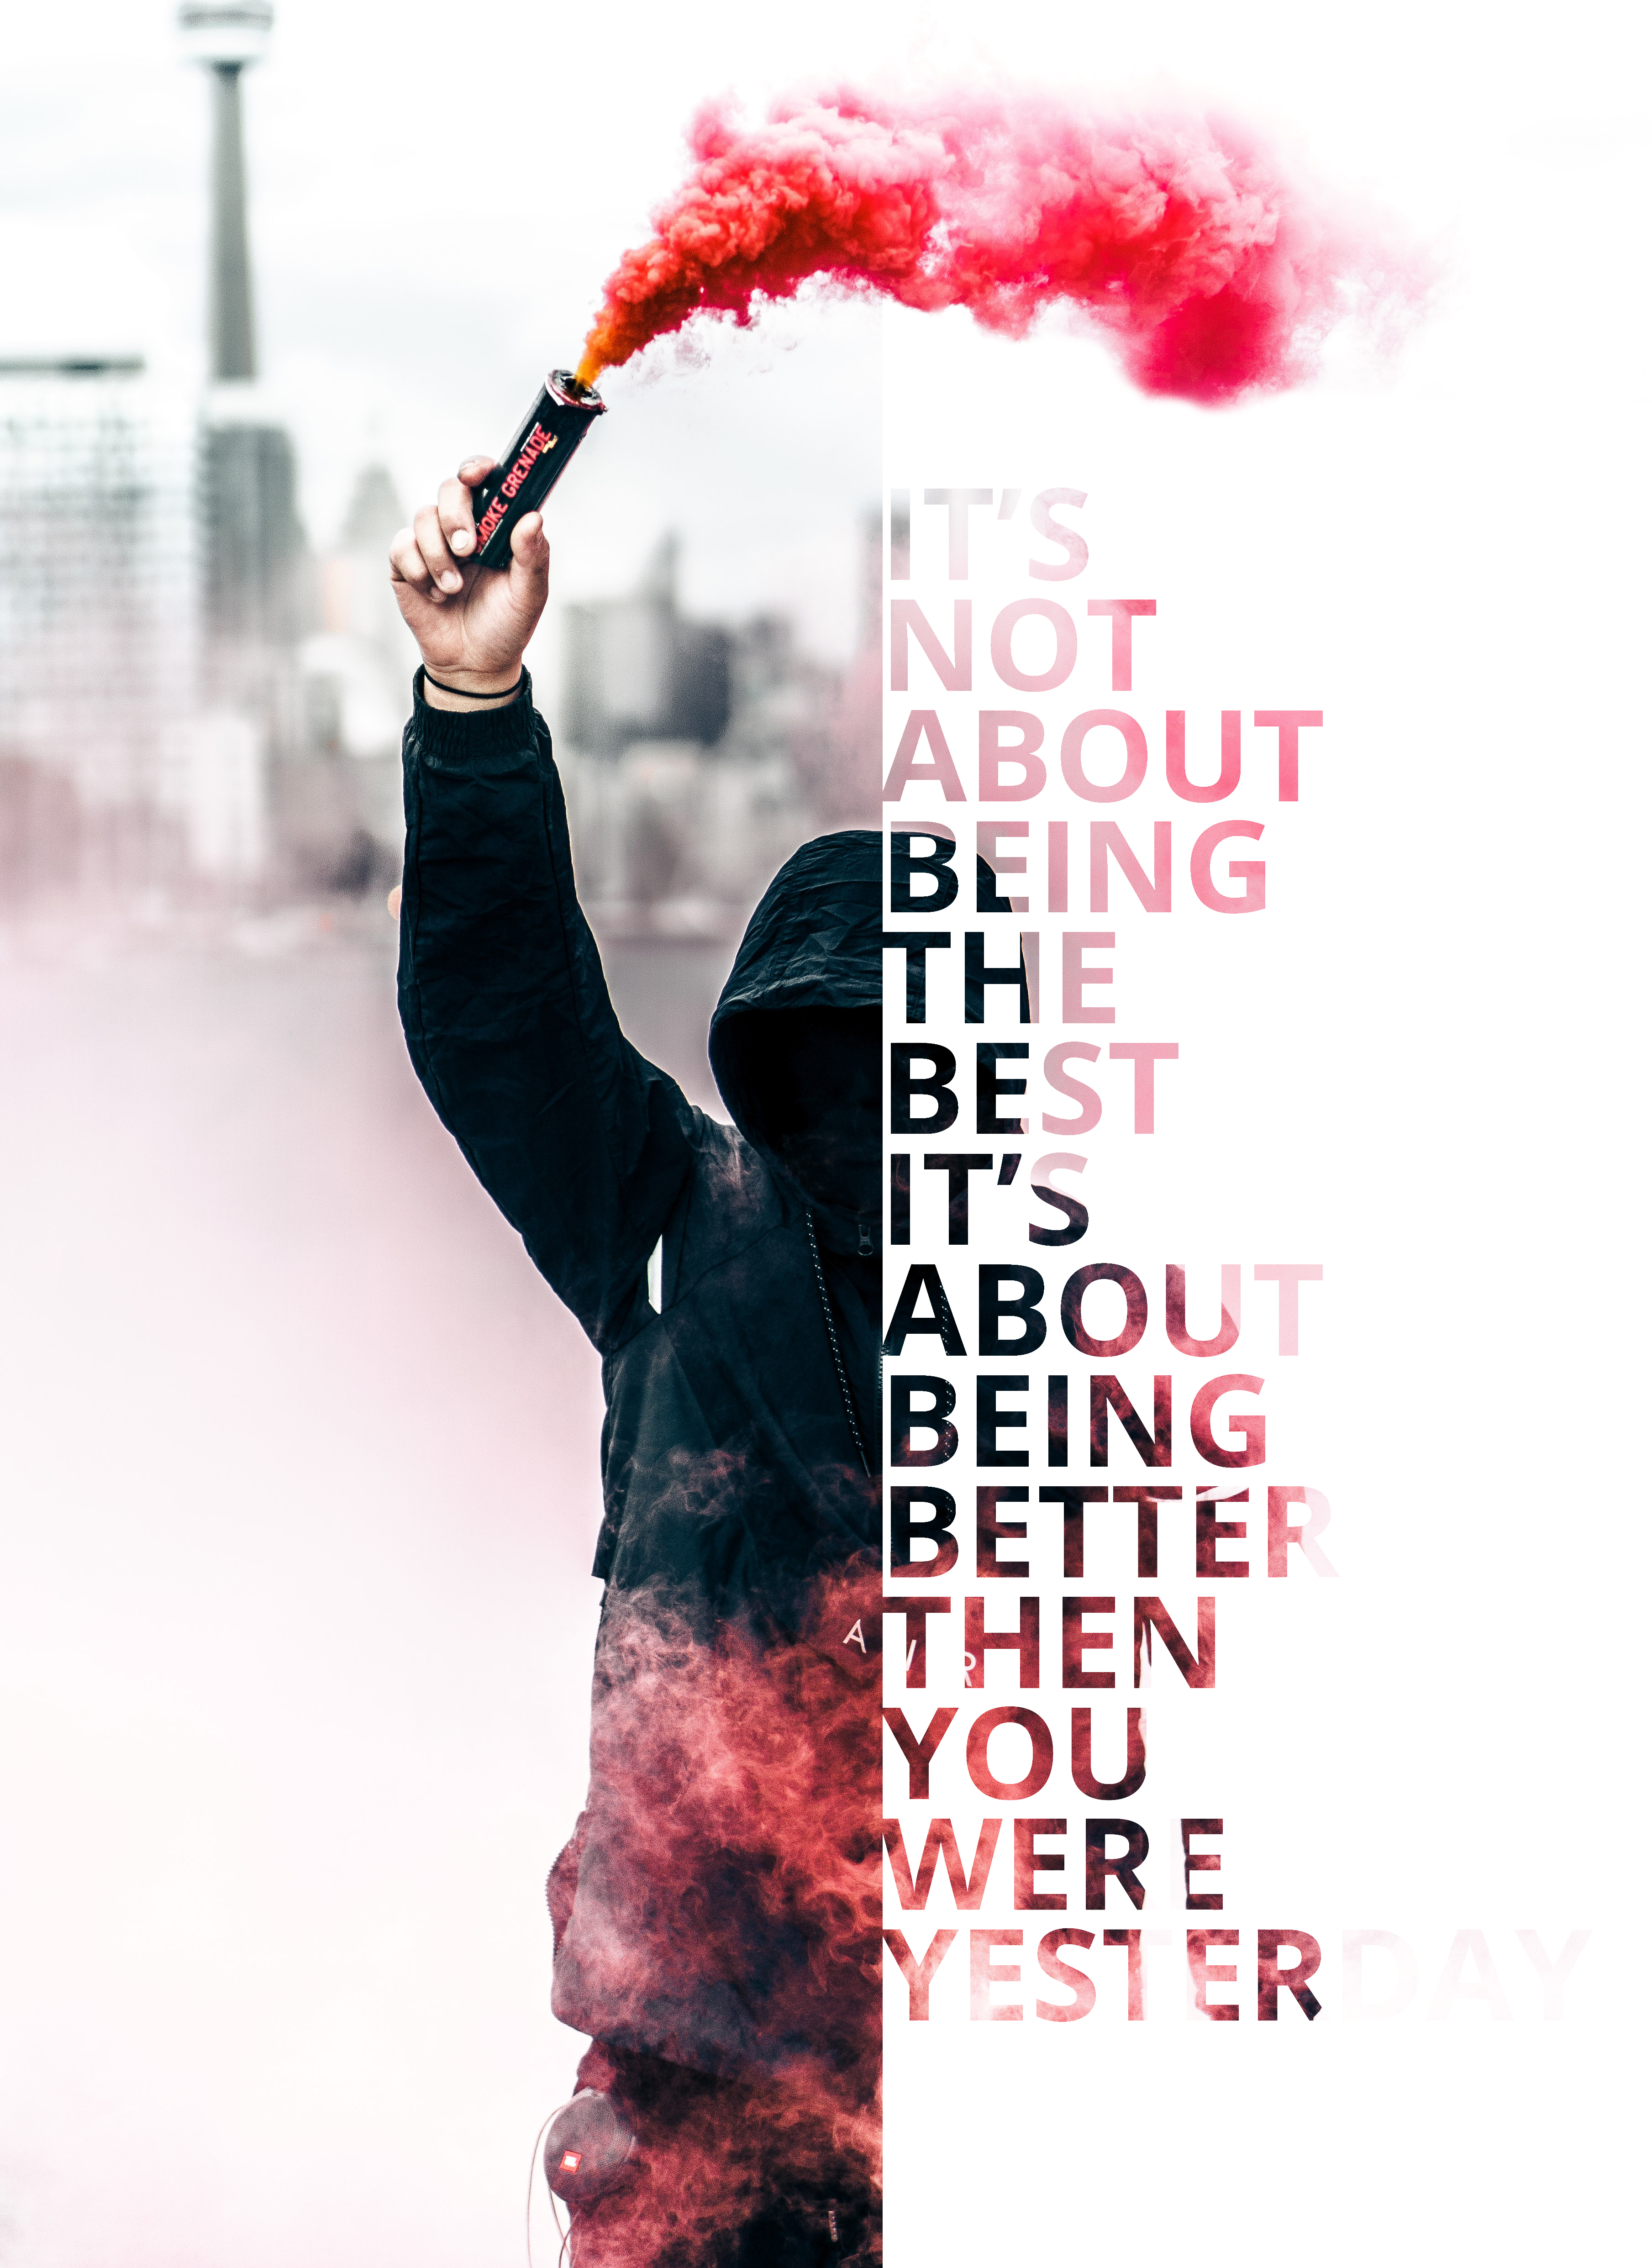 protestors, Typography, Colored smoke, Photoshop, Quote, Spelling Wallpaper